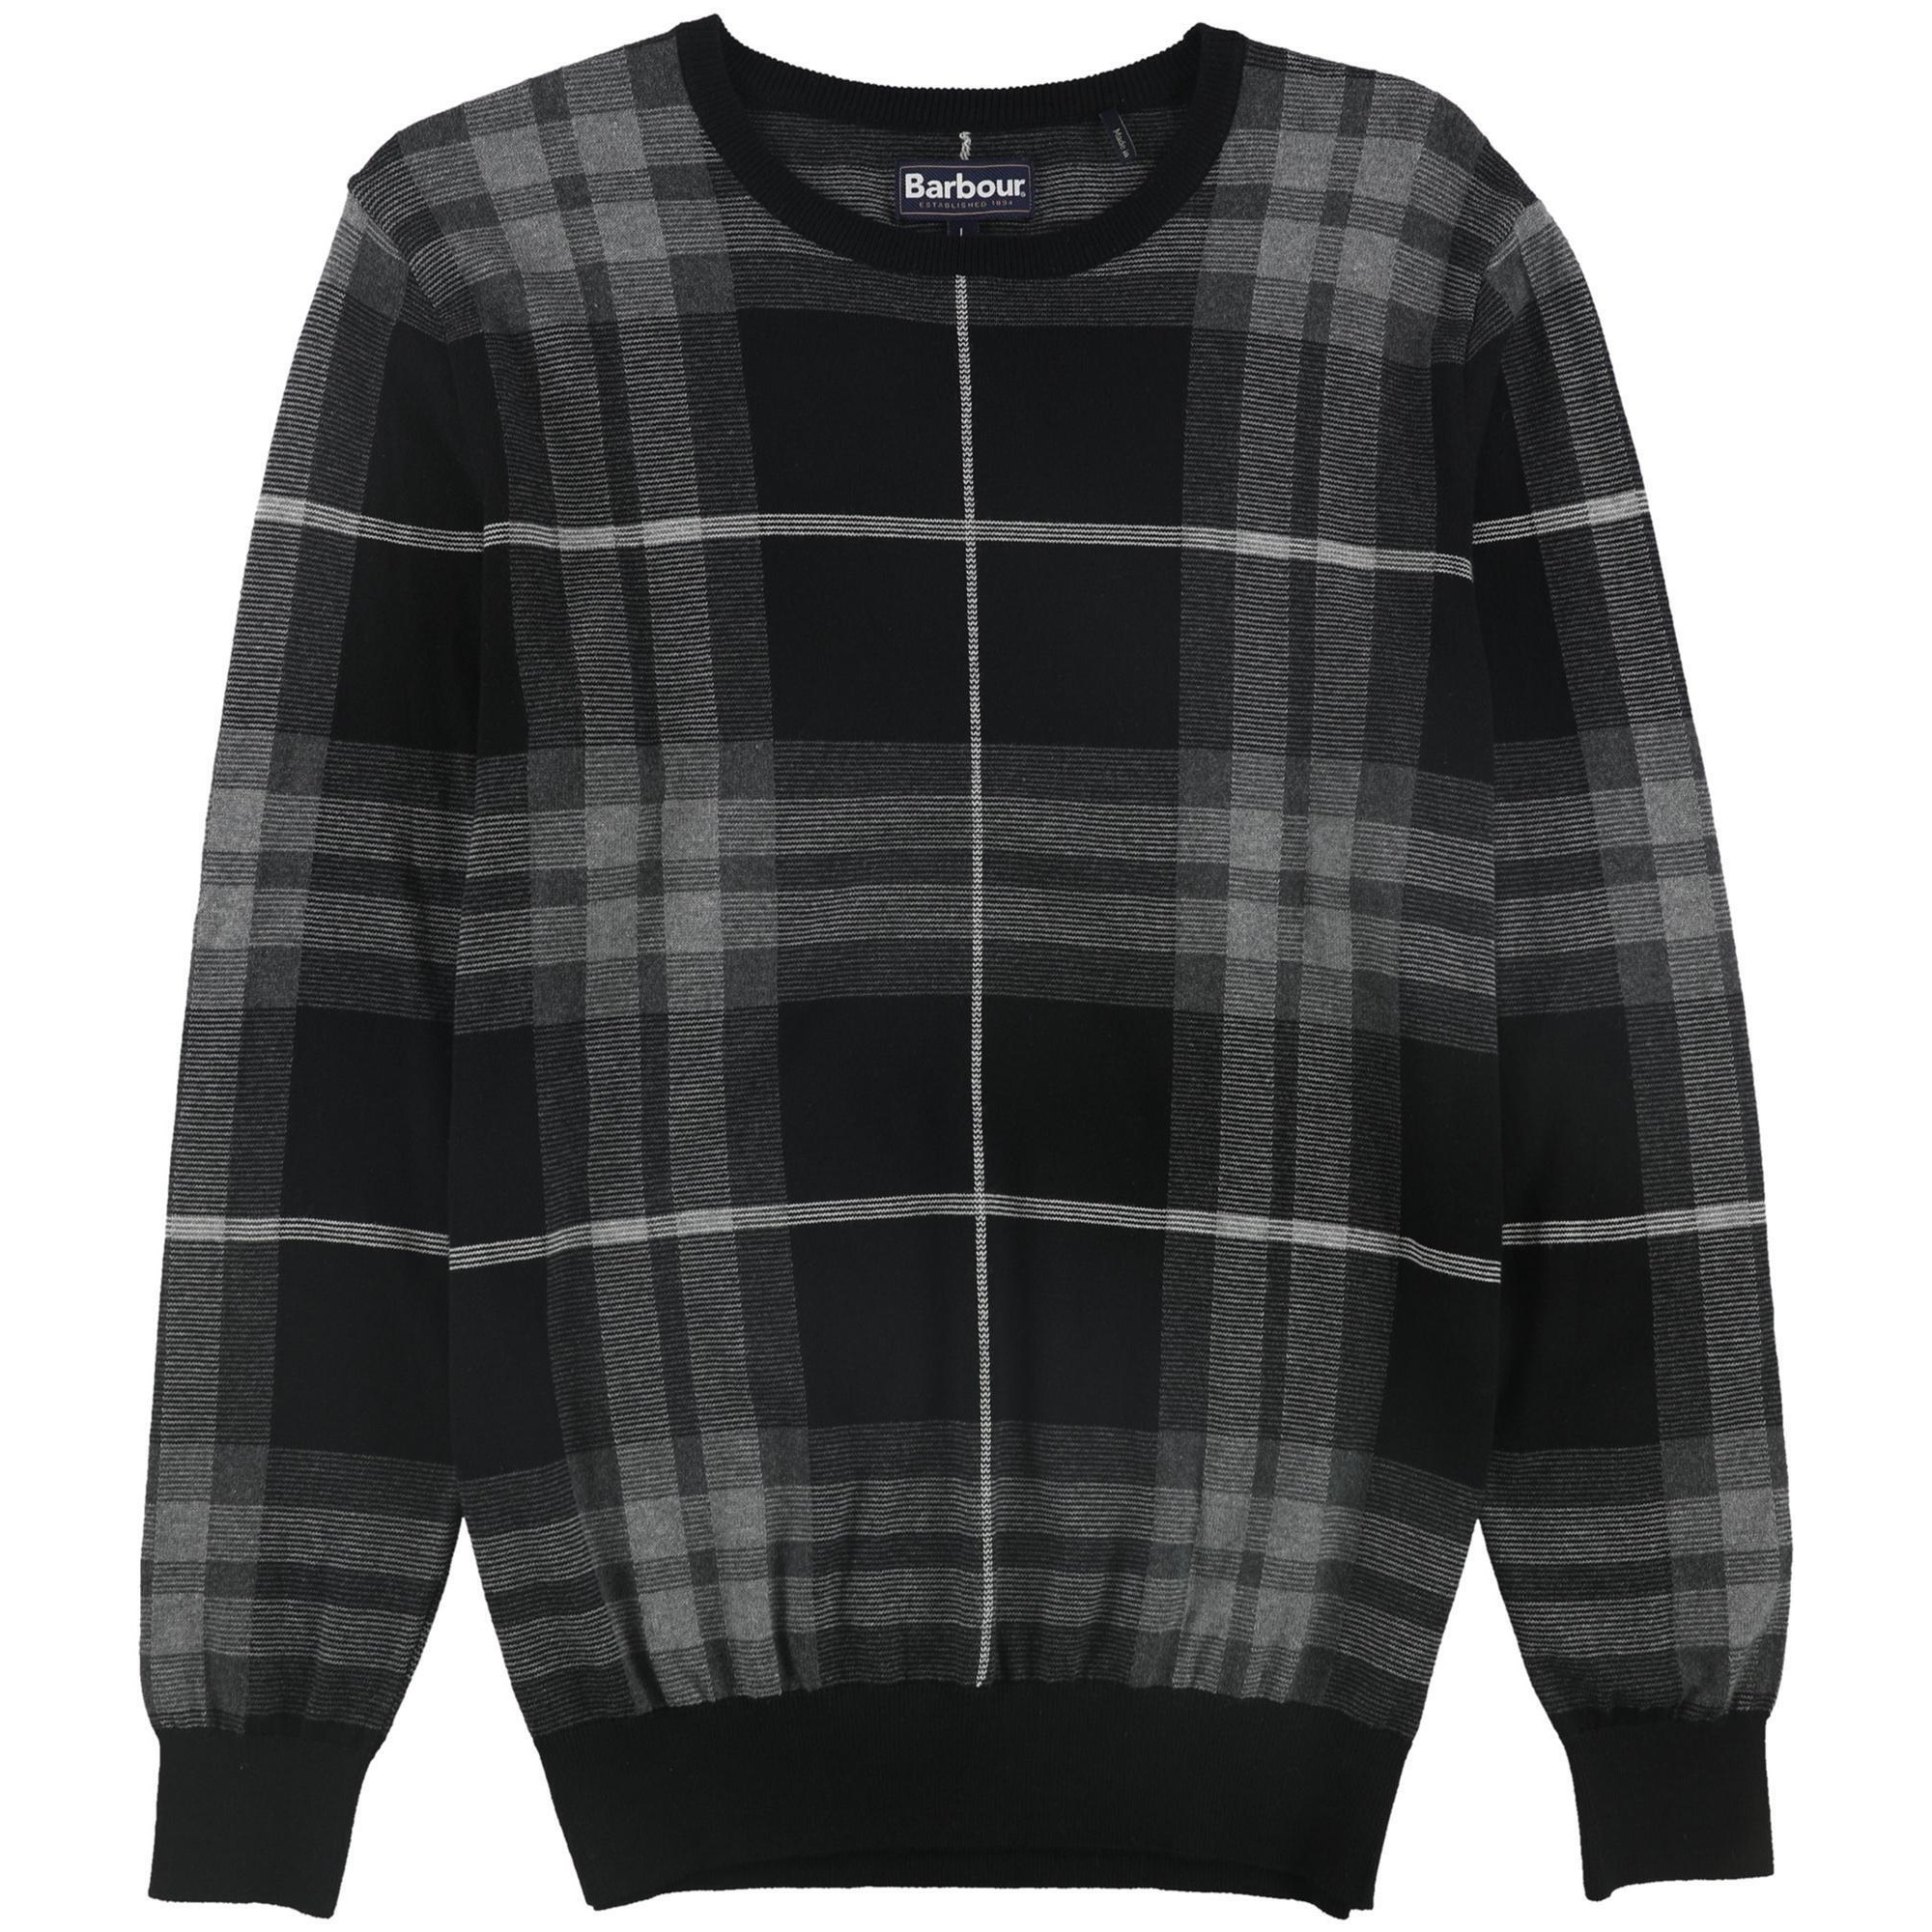 Barbour Mens Plaid Pullover Sweater, Style # MKN1120GY92